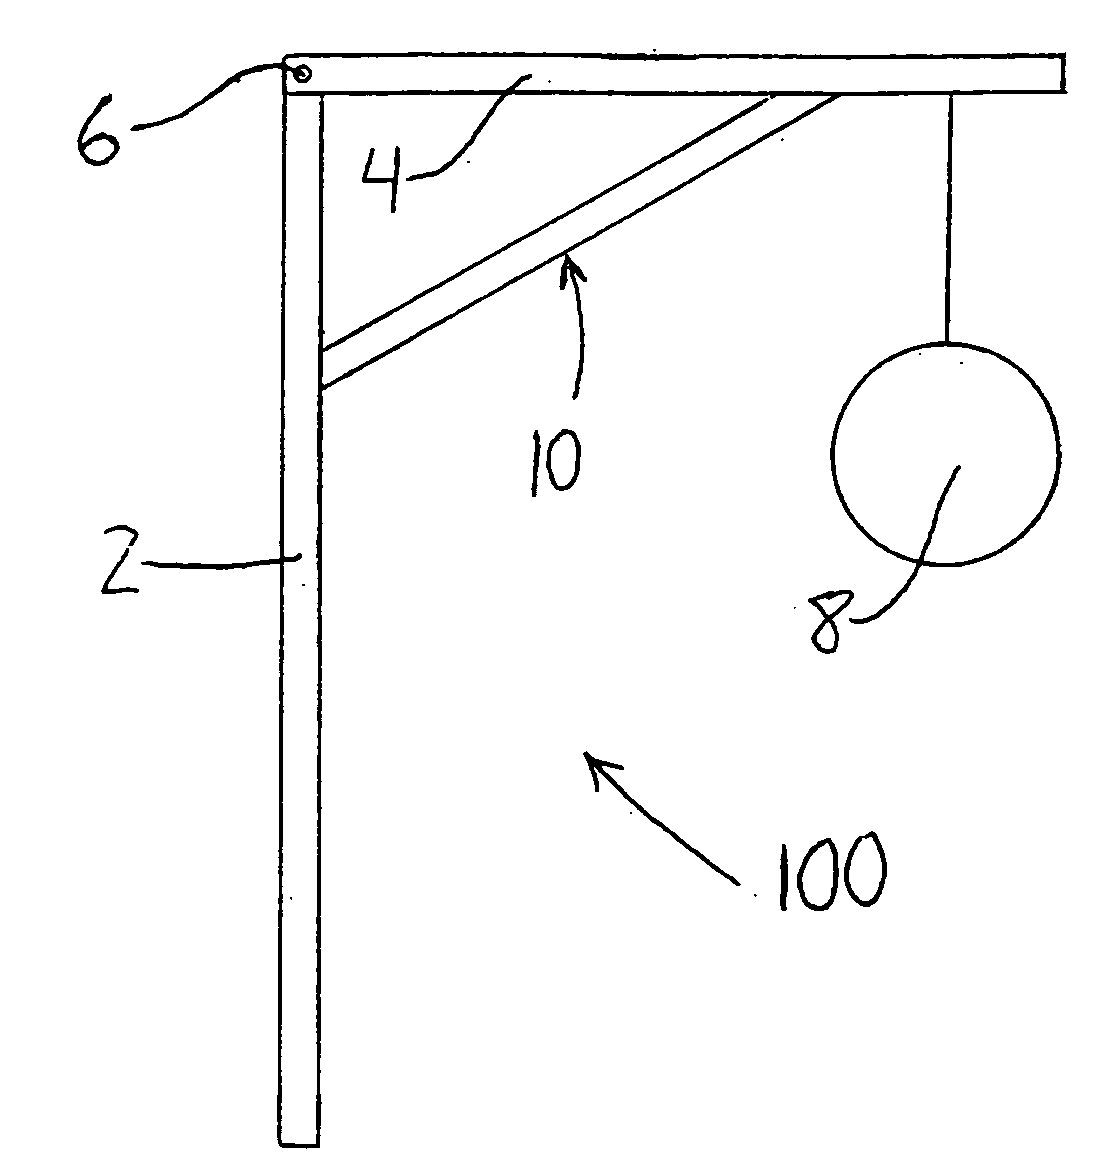 Overload indicator for a load supporting apparatus